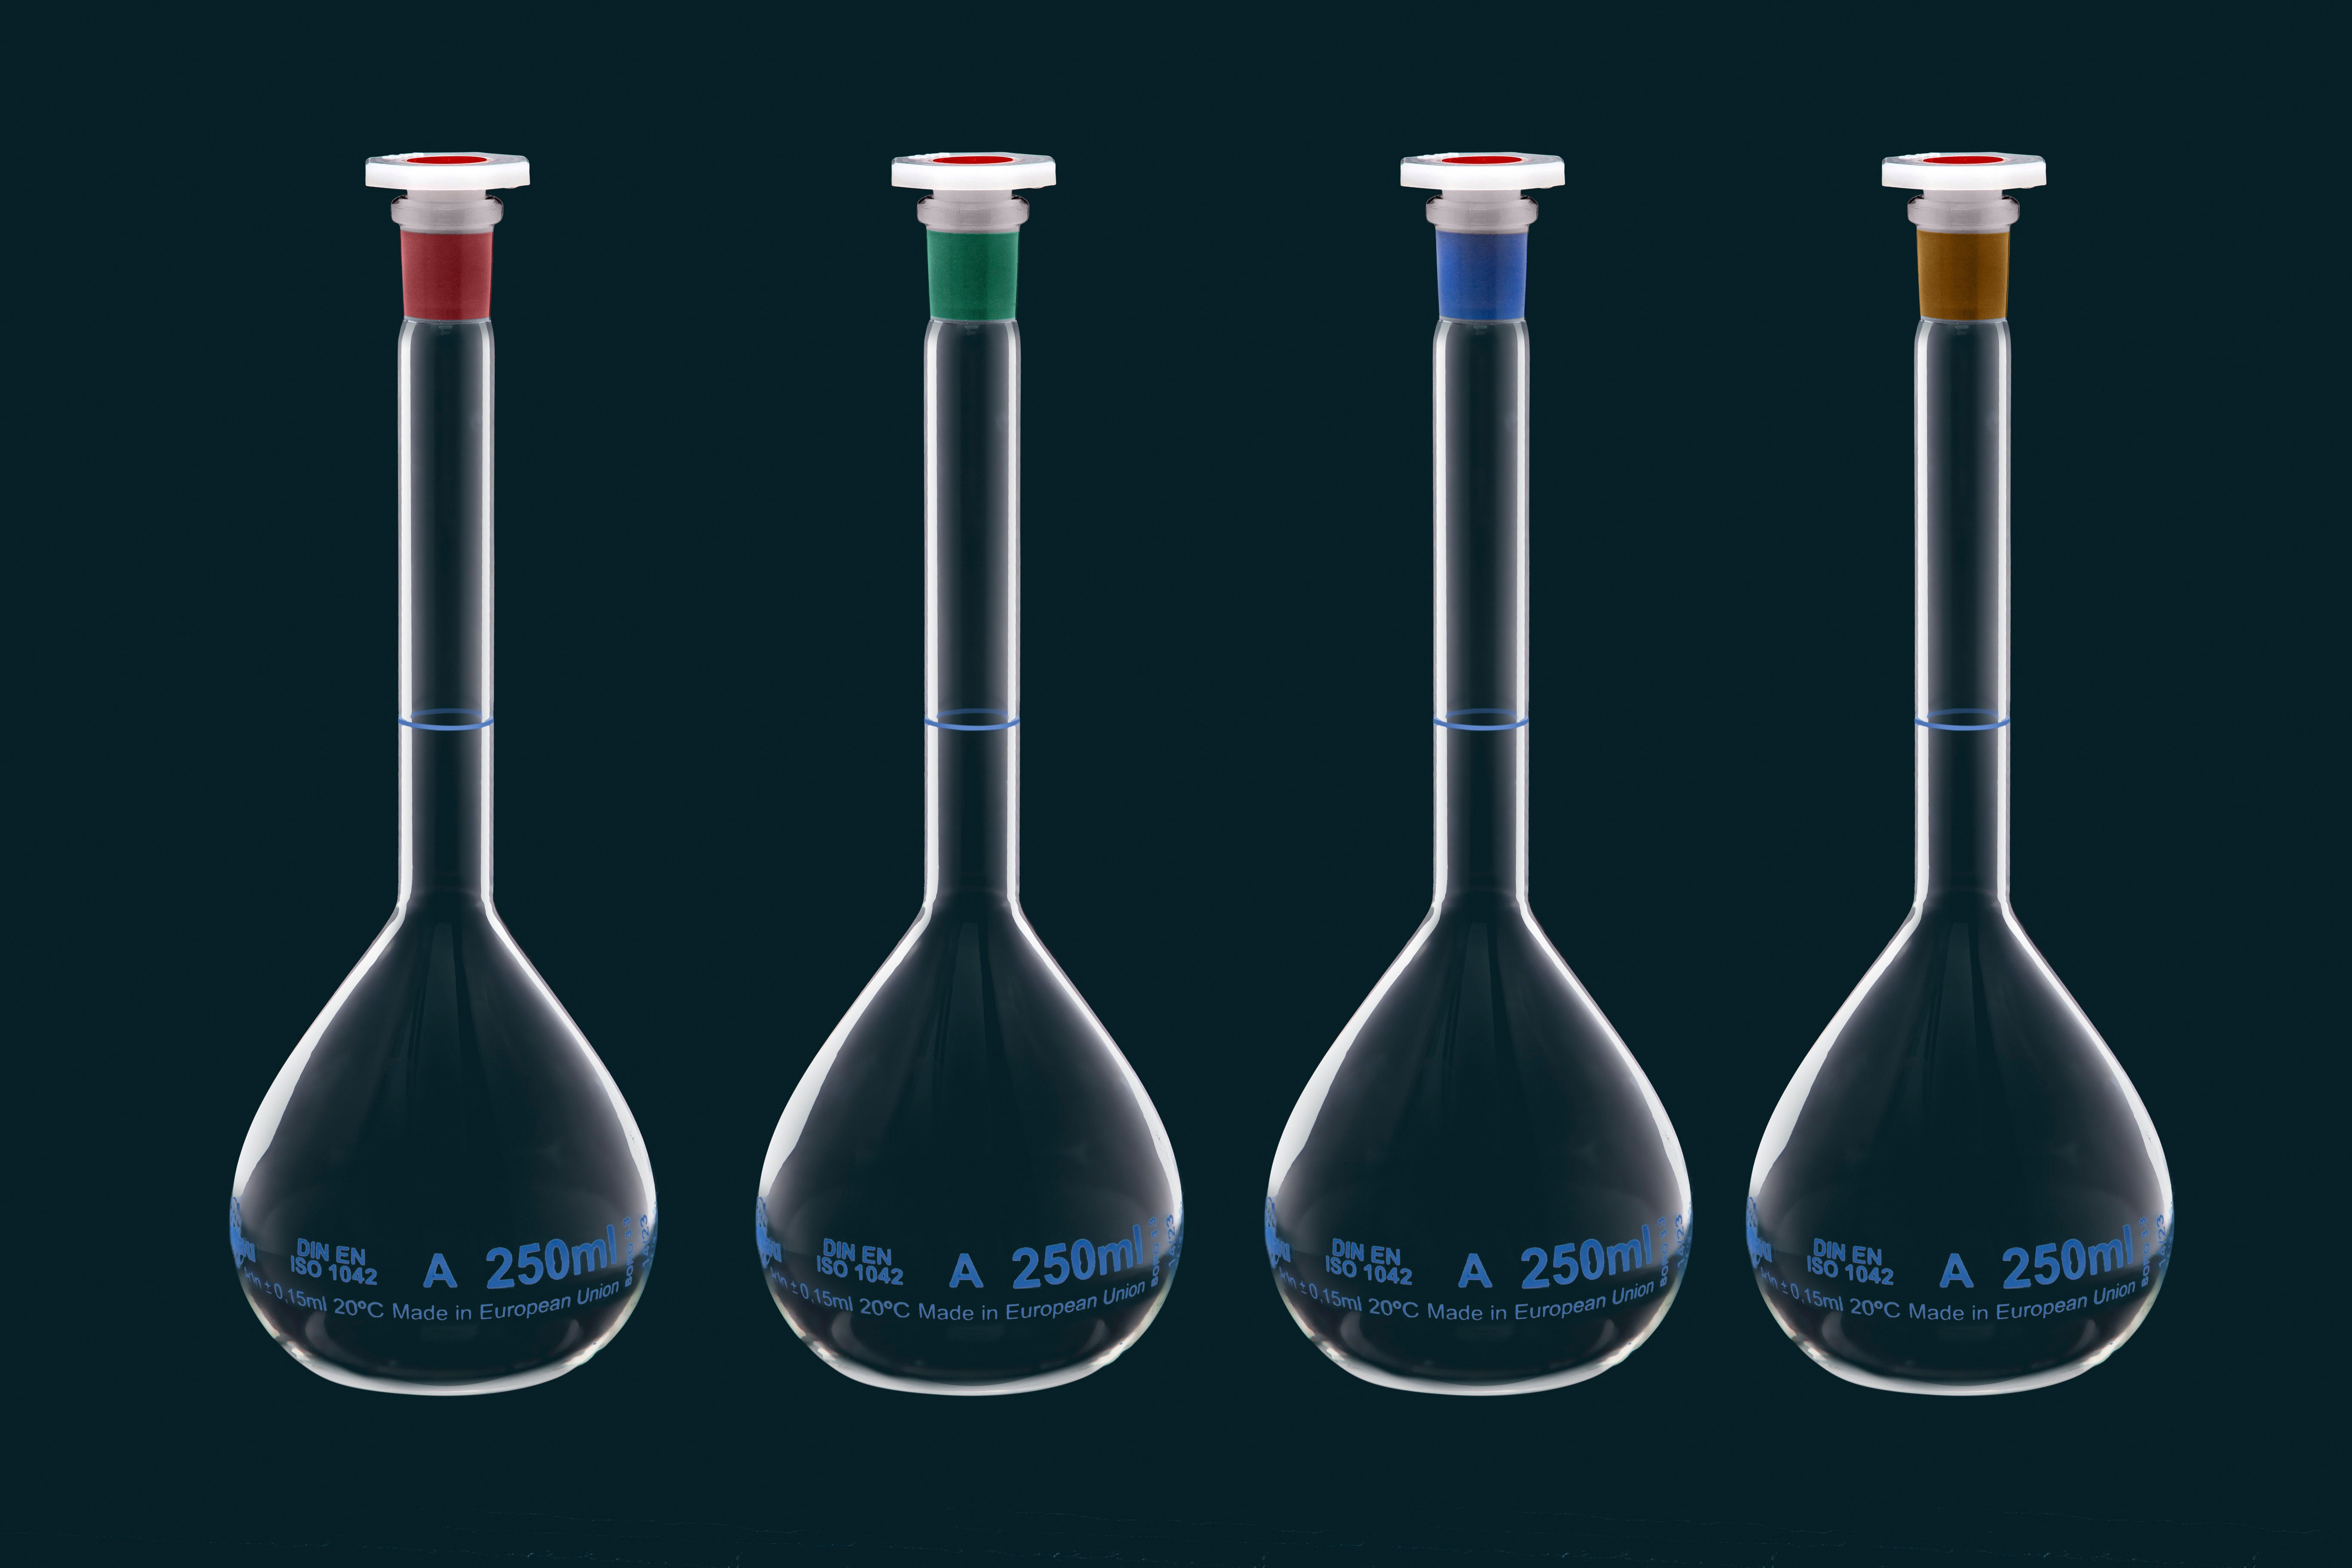 Volumetric flask with blue neck, Class A, 250ml, with PE stopper, lot number and certificate of conformity